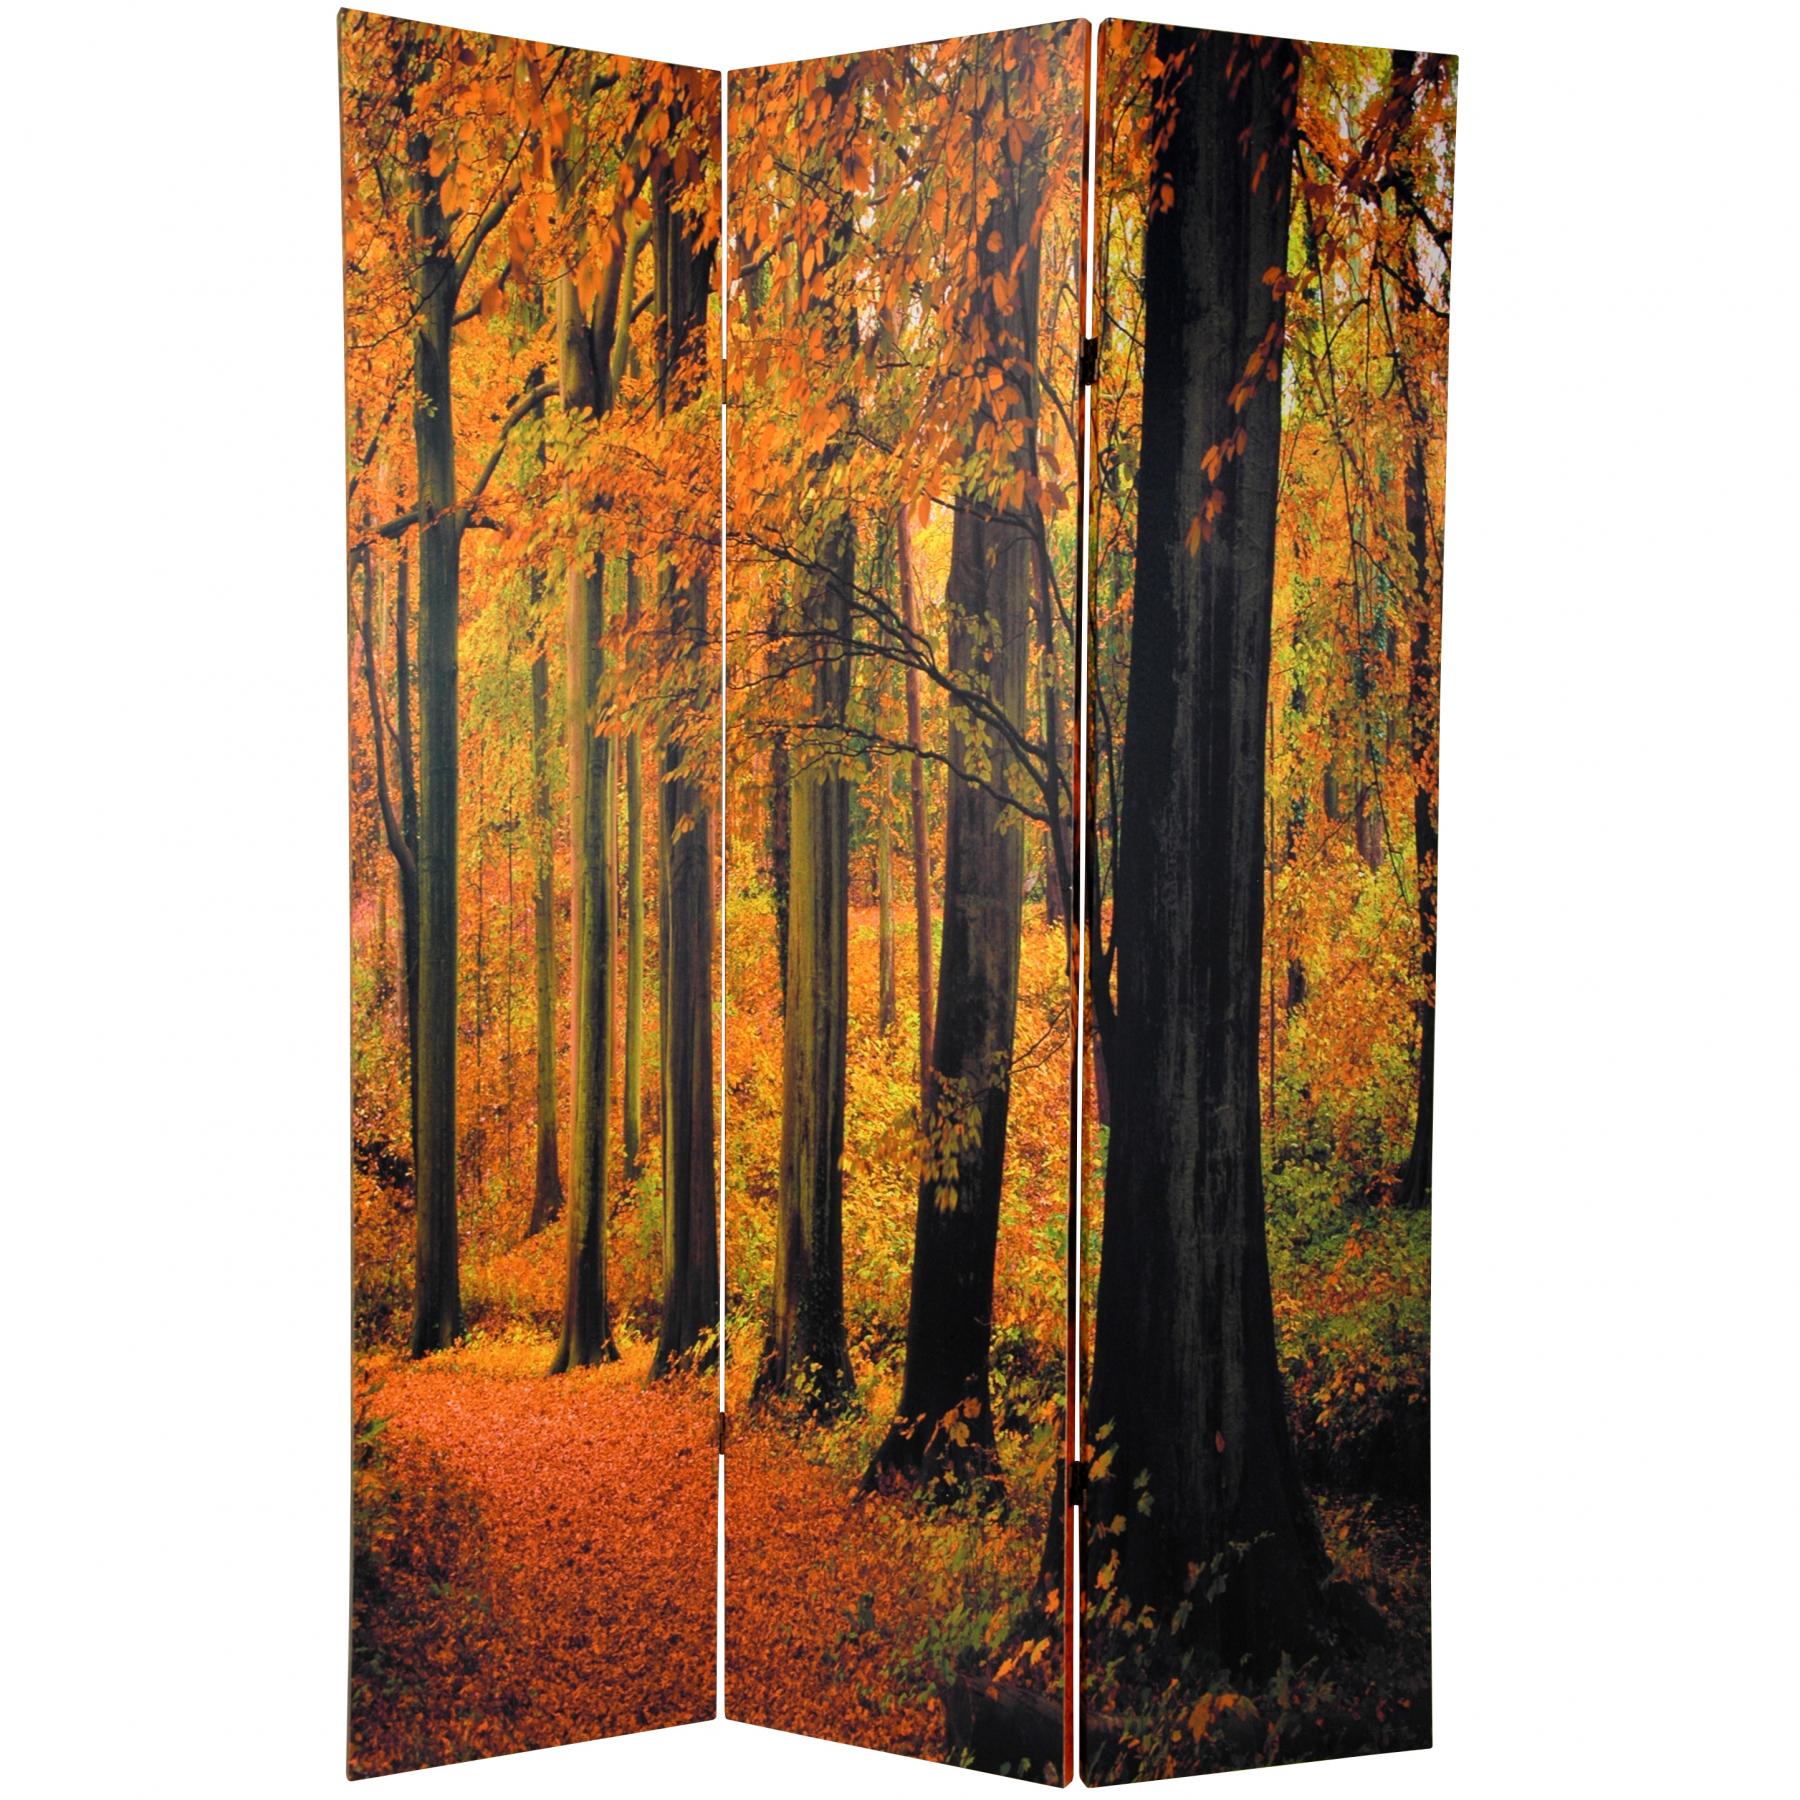 6 ft. Tall Double Sided Autumn Trees Room Divider | RoomDividers.com